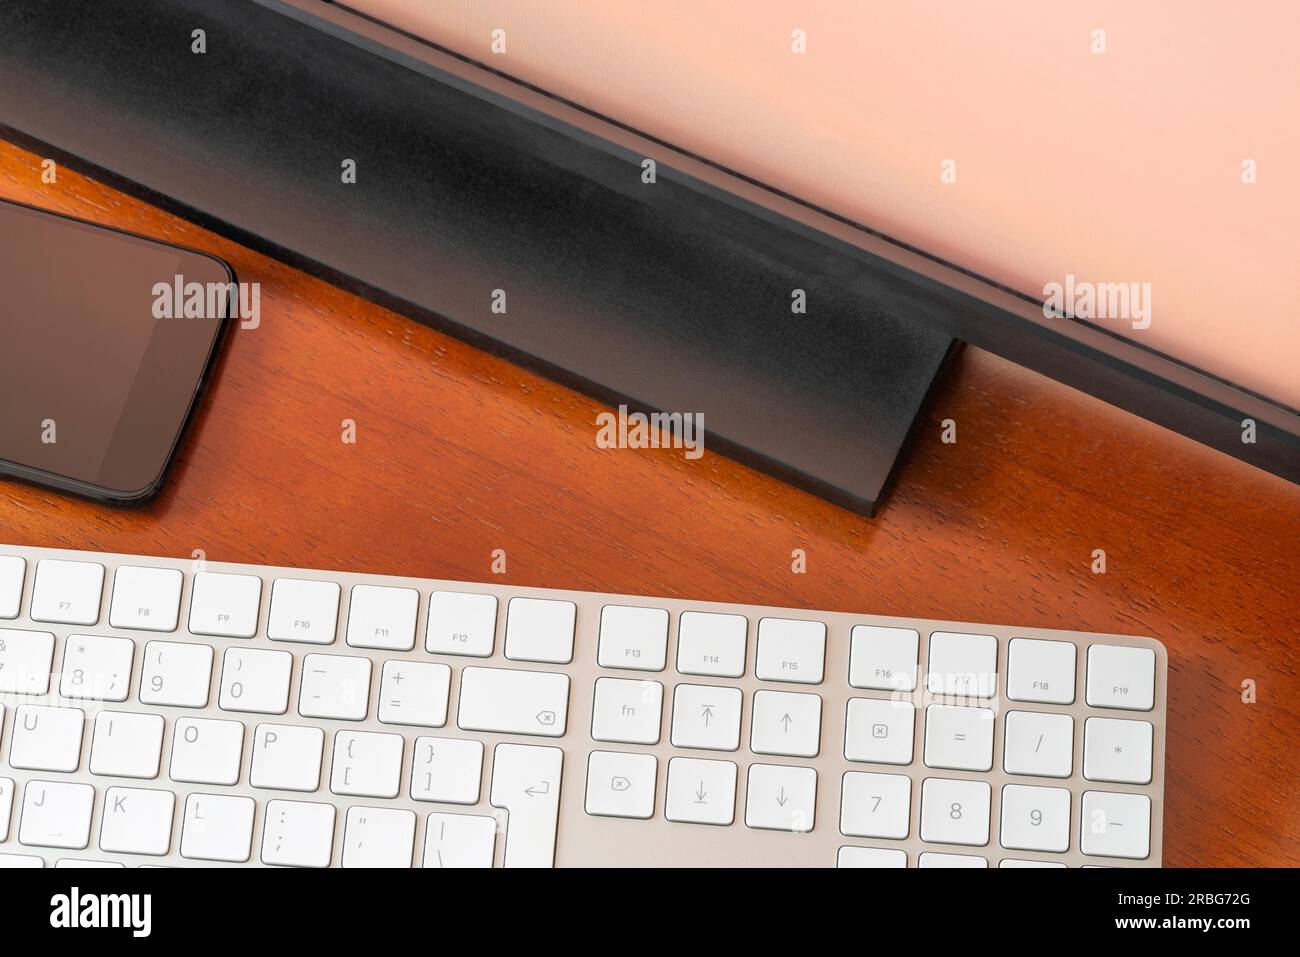 A computer monitor, a digital wireless keyboard and a black smartphone on a round wooden desk Stock Photo